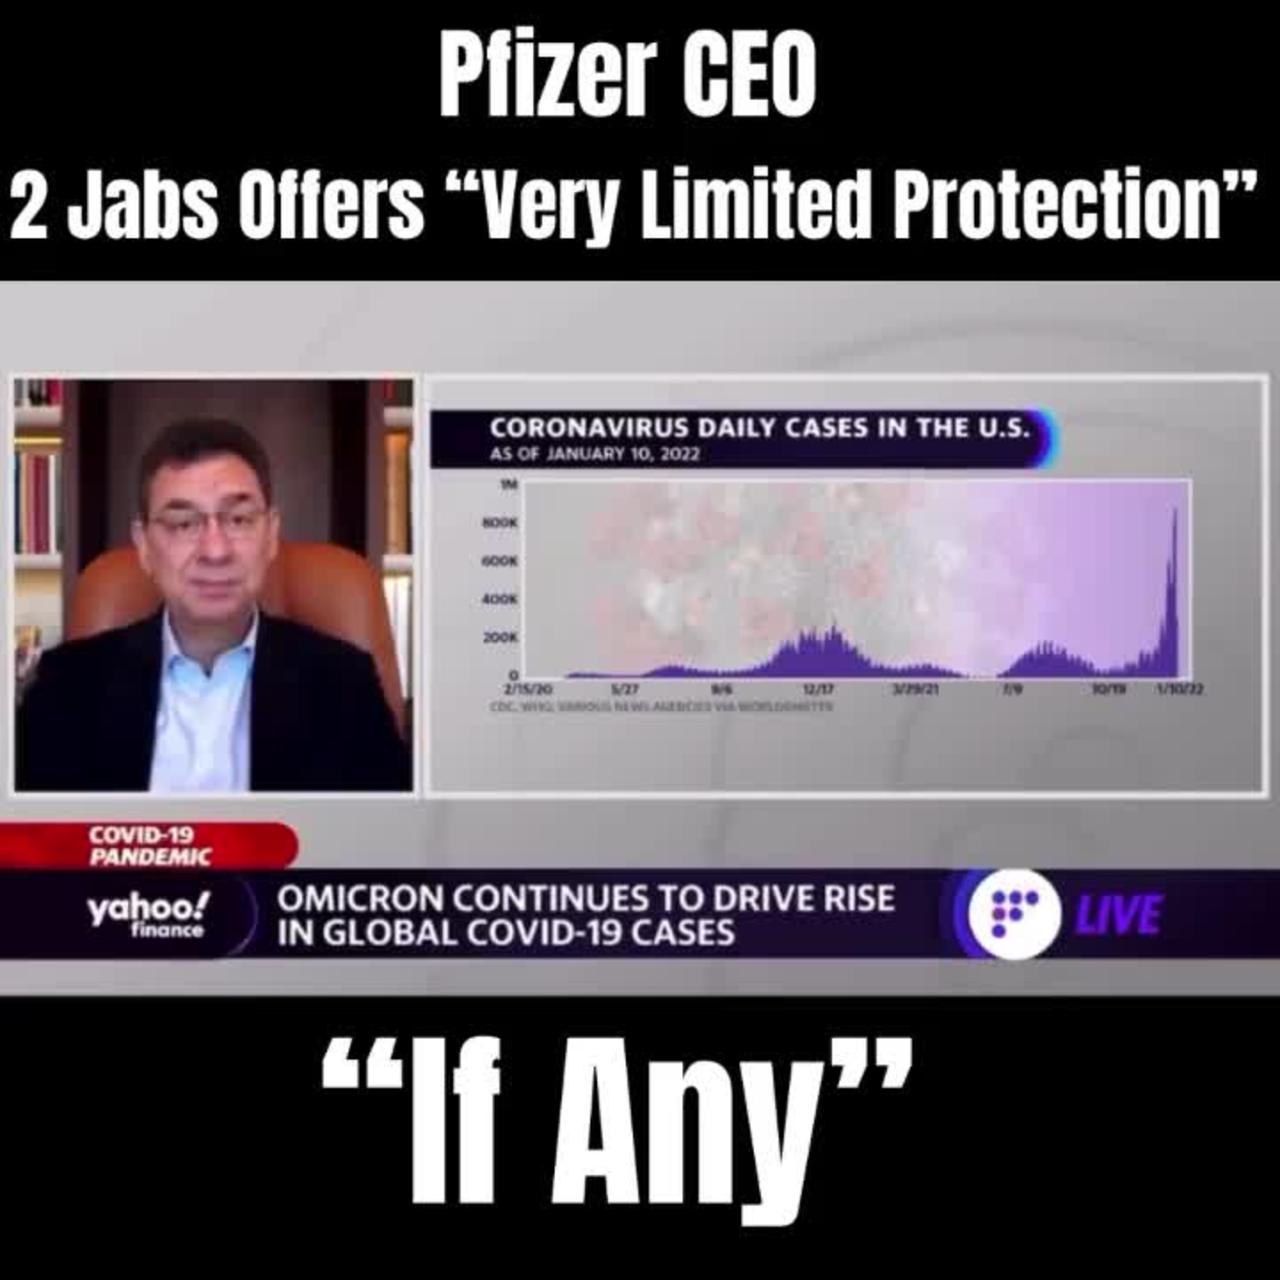 Hunger games covid dystopia: Pfizer CEO Bourla admits that 2 jabs offer "very limited protection"